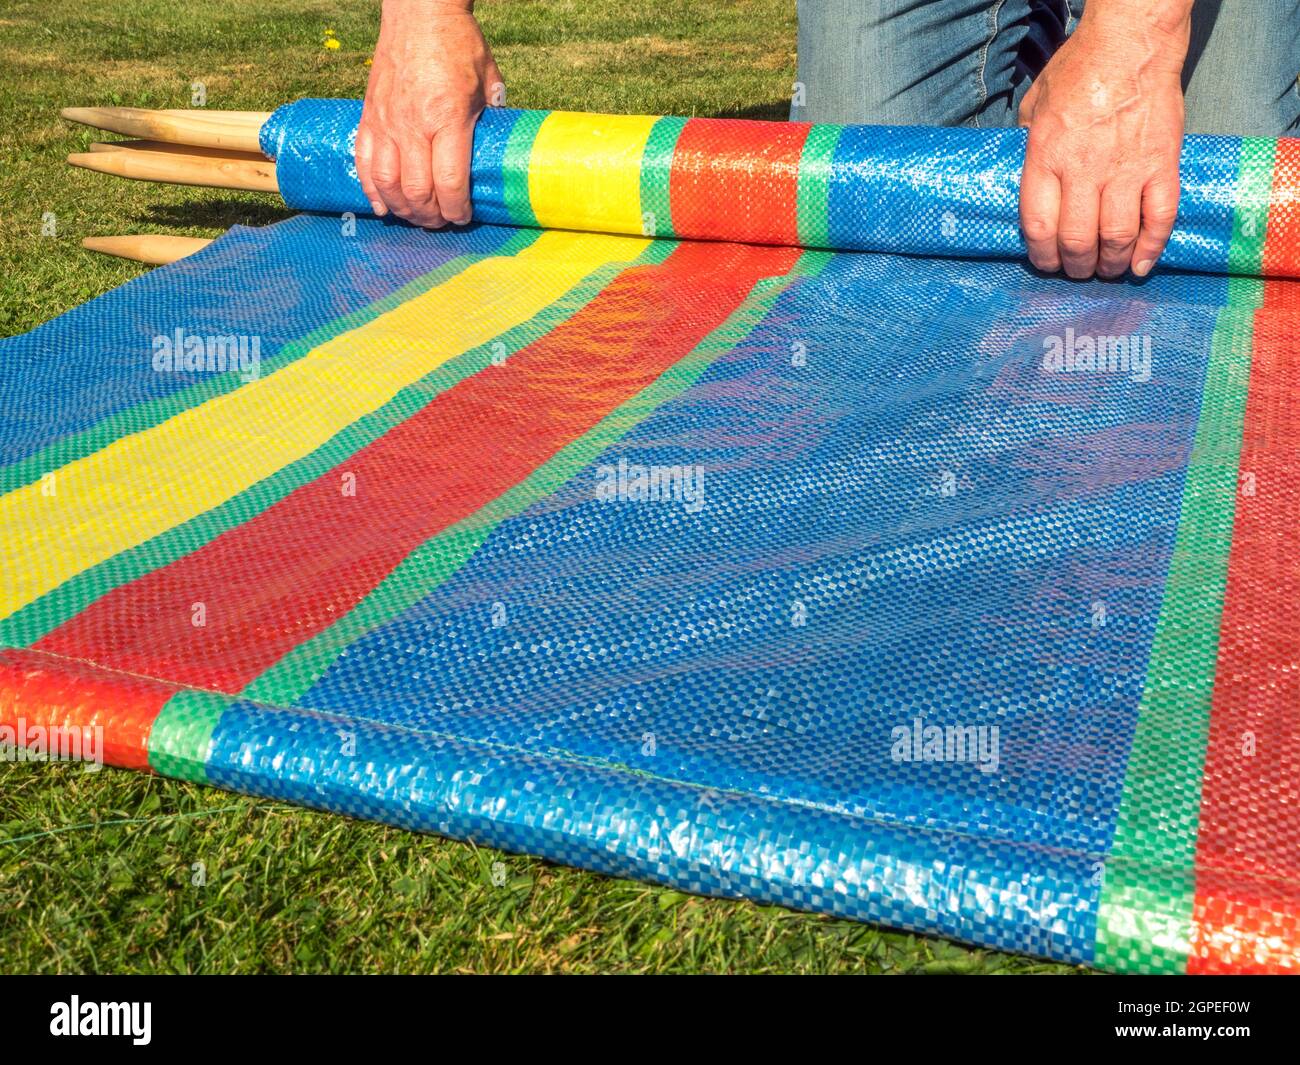 Closeup POV shot at ground level of a man’s hands rolling or unrolling a colorful camping windbreak / windscreen and wooden poles on a piece of grass. Stock Photo